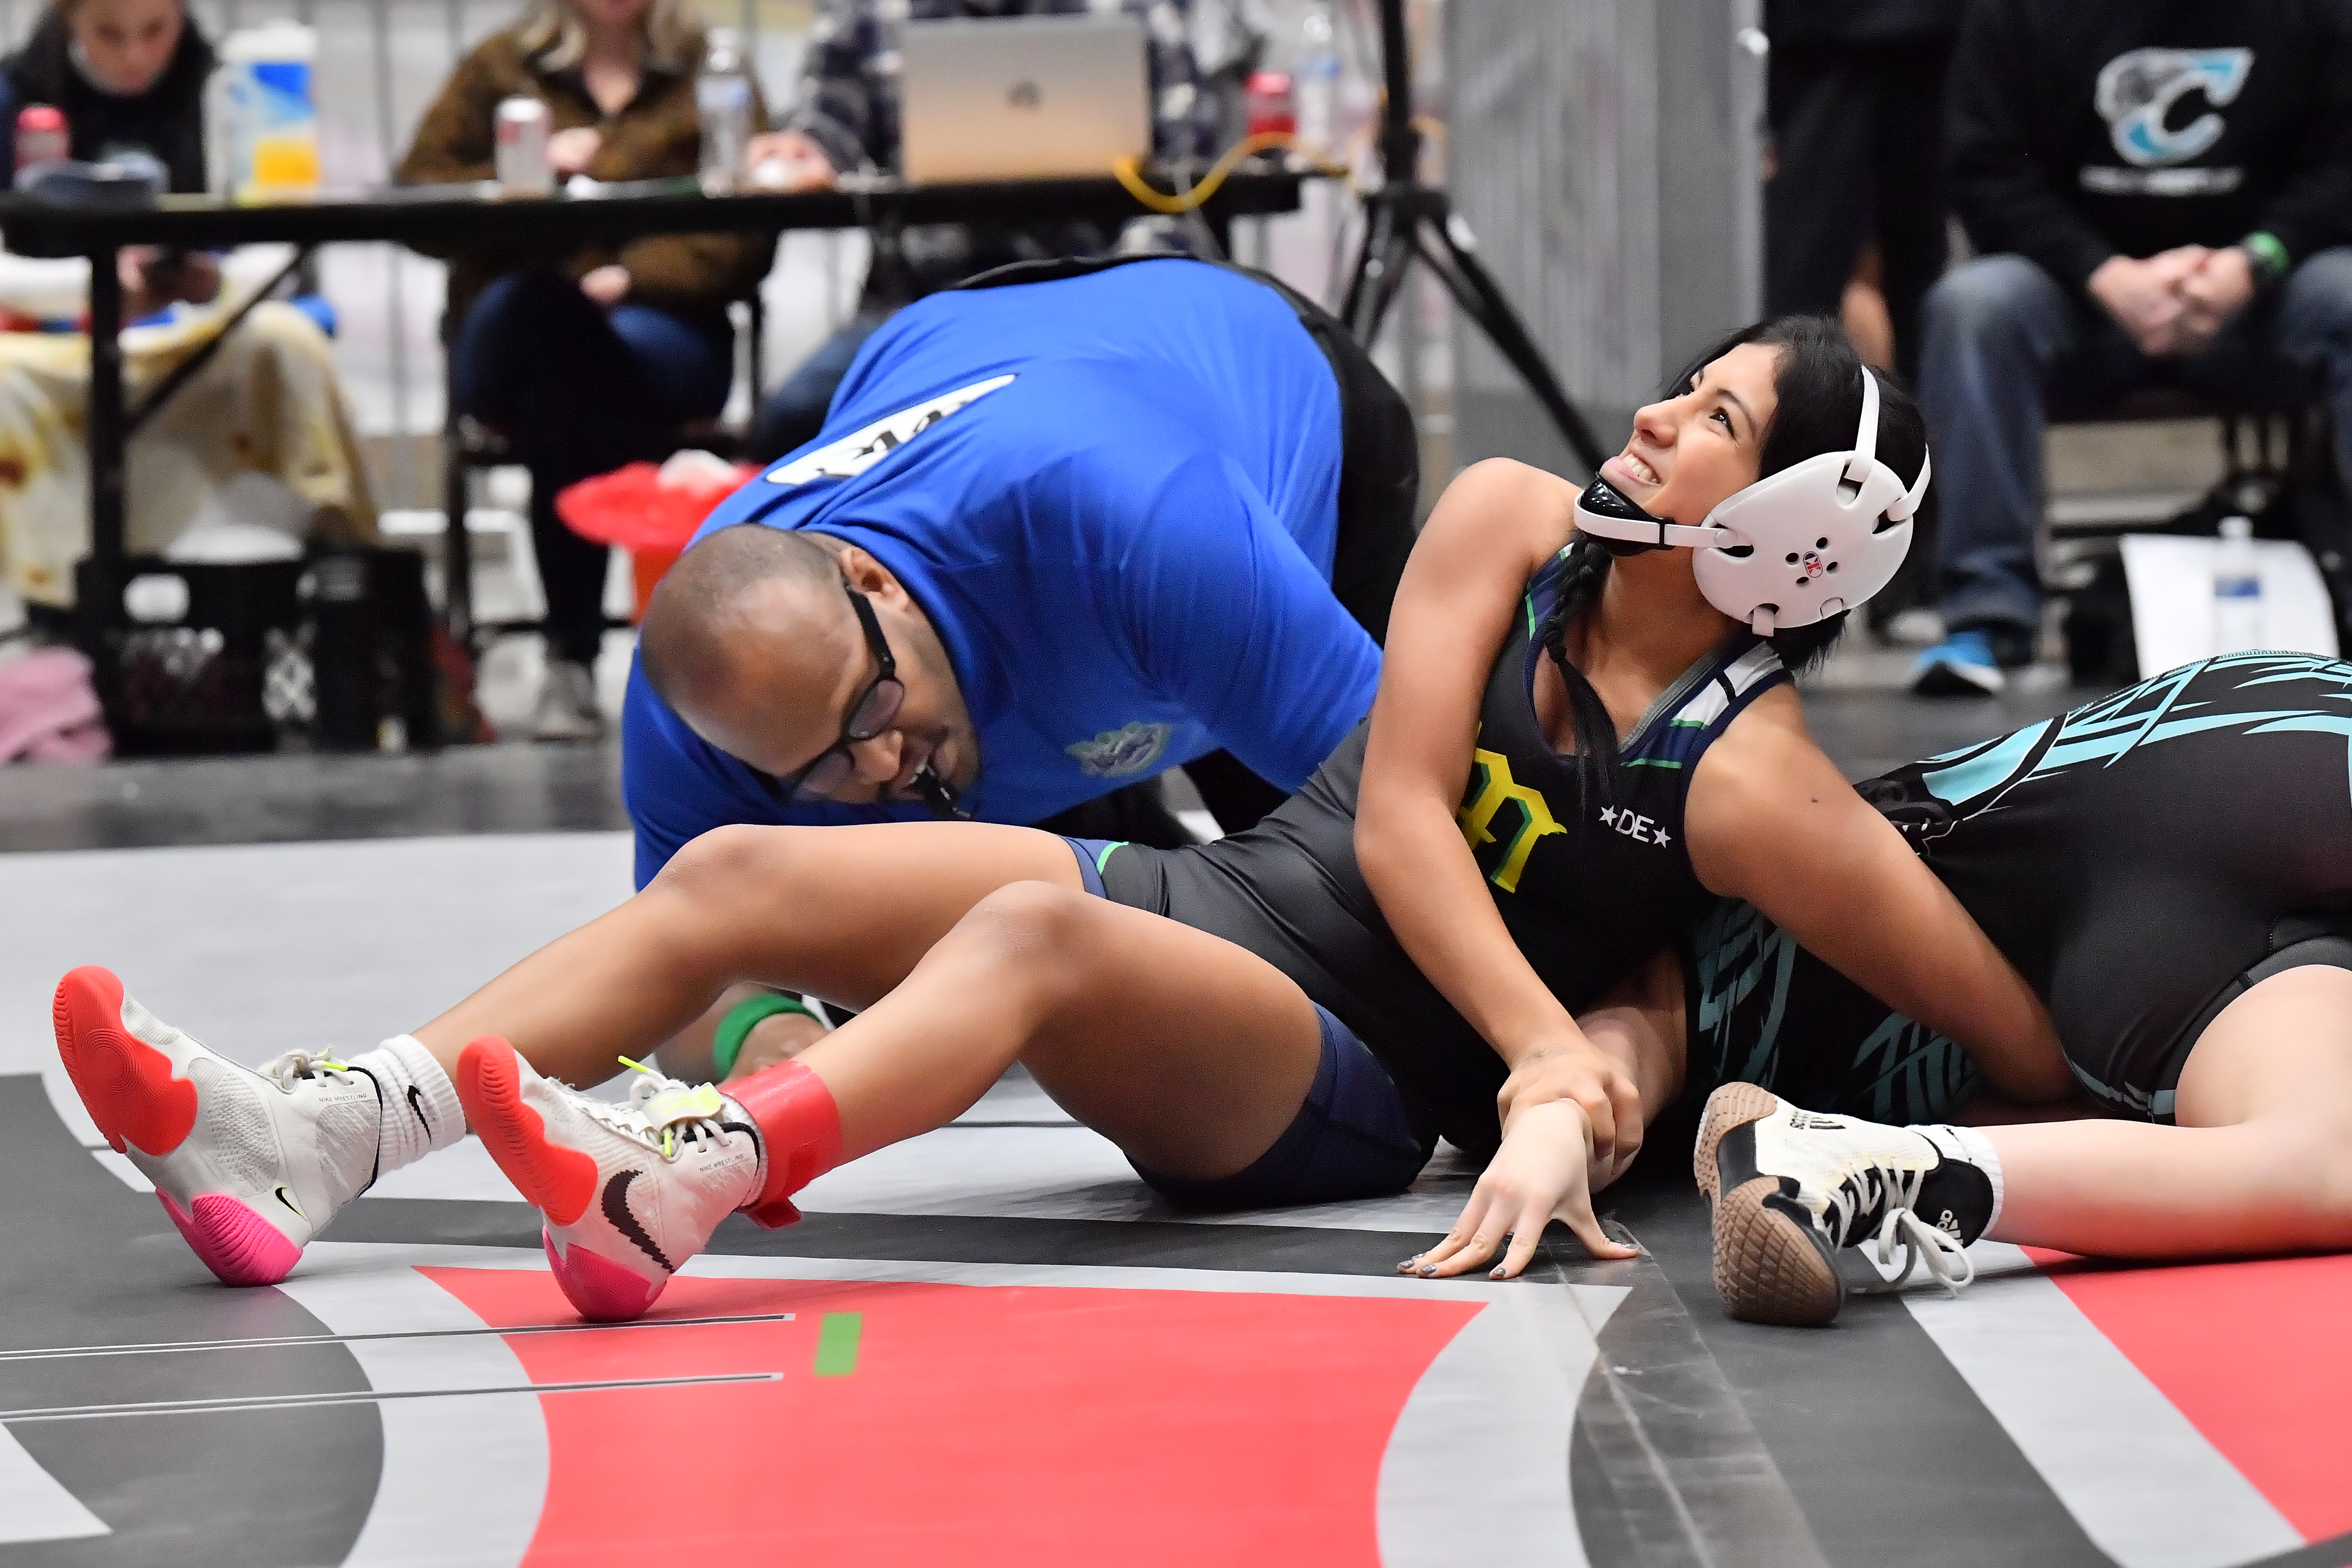 Girls wrestling becomes an officially sanctioned sport in Oregon